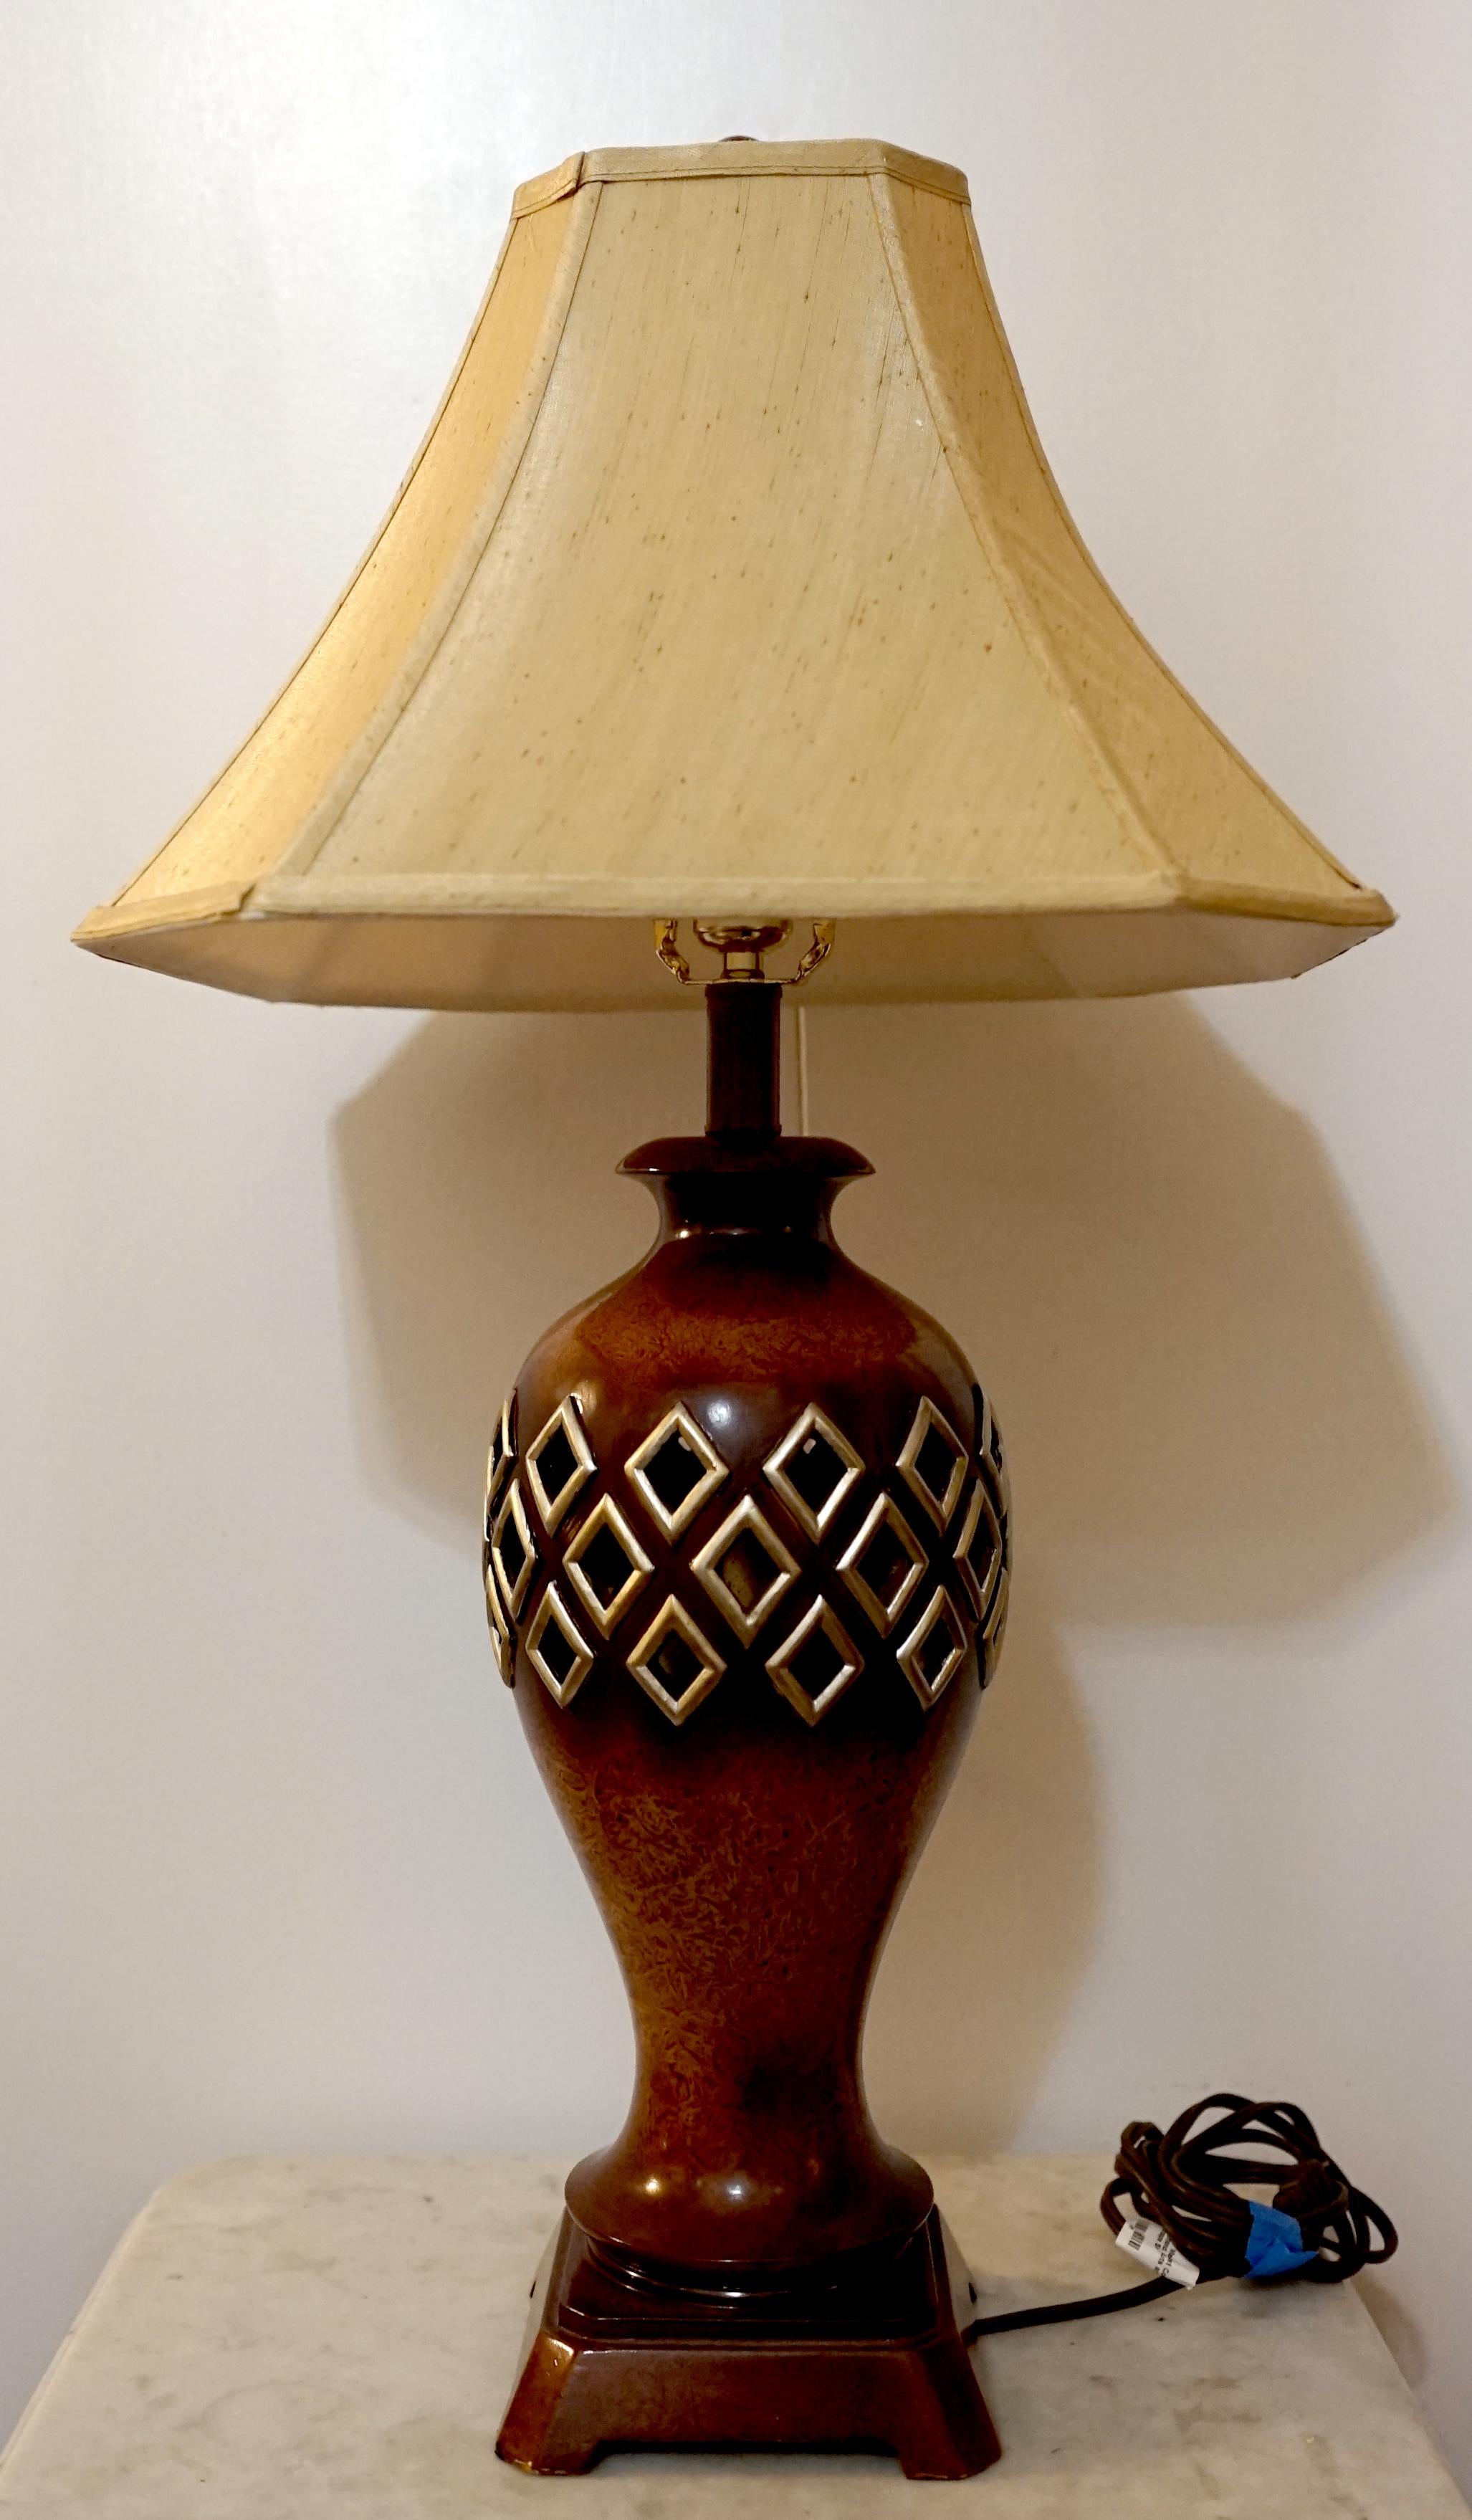 This lamp is a vintage Regency style pierced burled wood, baluster table lamp
from the second half 20th Century. Beautiful wood grain and patina. The most memorable feature is the diamond cut-outs, which are enhanced with faux-gilt highlights. The